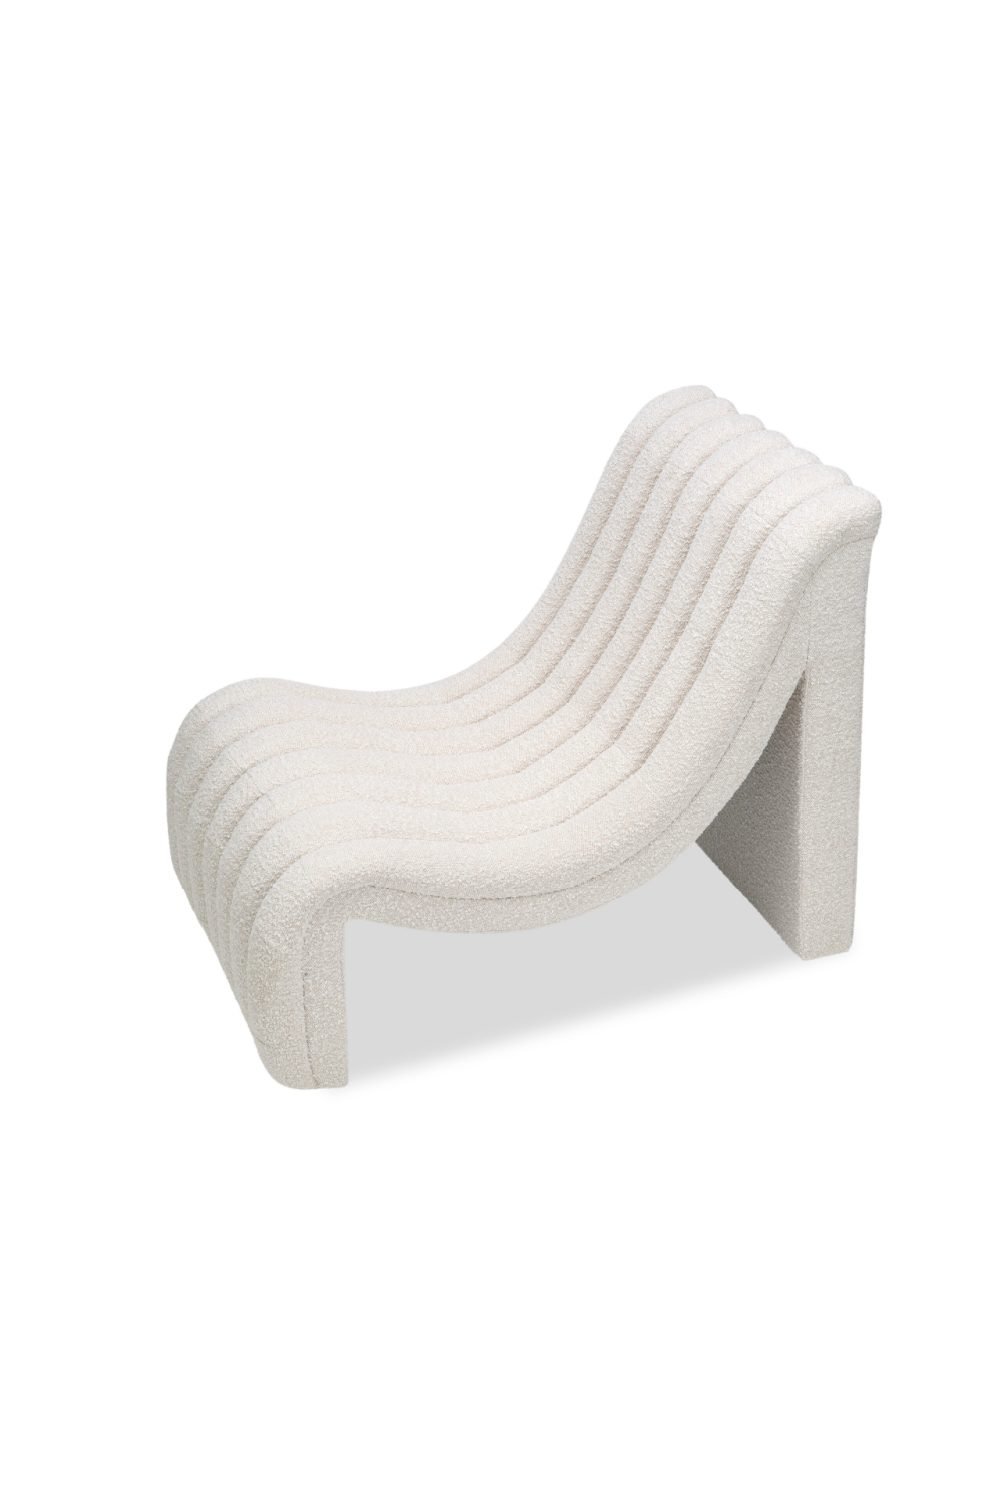 White Bouclé Curved Occasional Chair | Liang & Eimil Flex | OROA